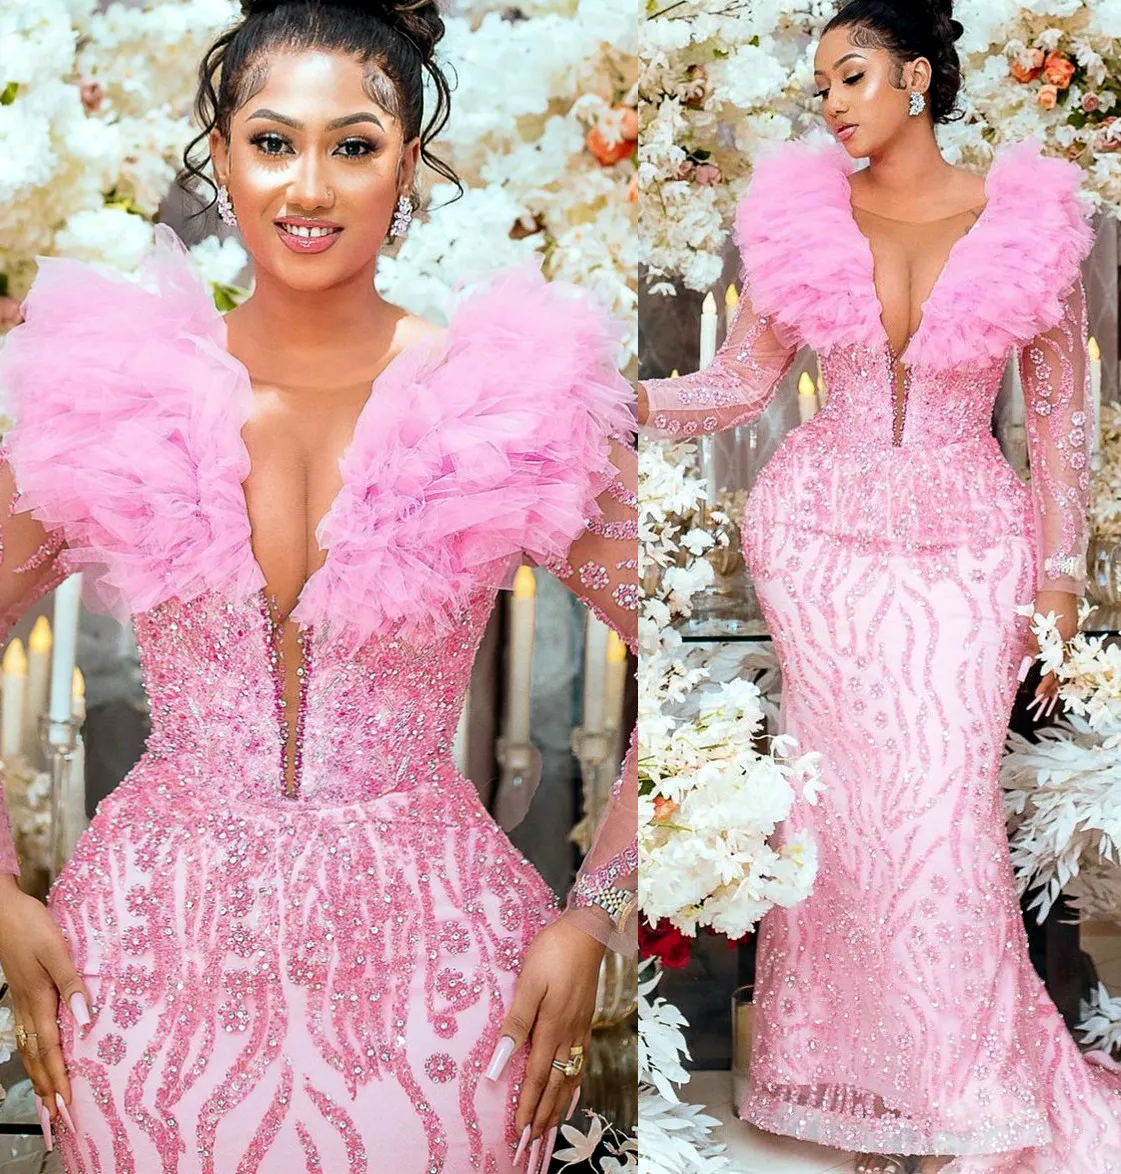 2022 Plus Size Arabic Aso Ebi Pink Mermaid Luxurious Prom Dresses Sheer Neck Evening Formal Party Second Reception Birthday Engagement Gowns Dress ZJ211